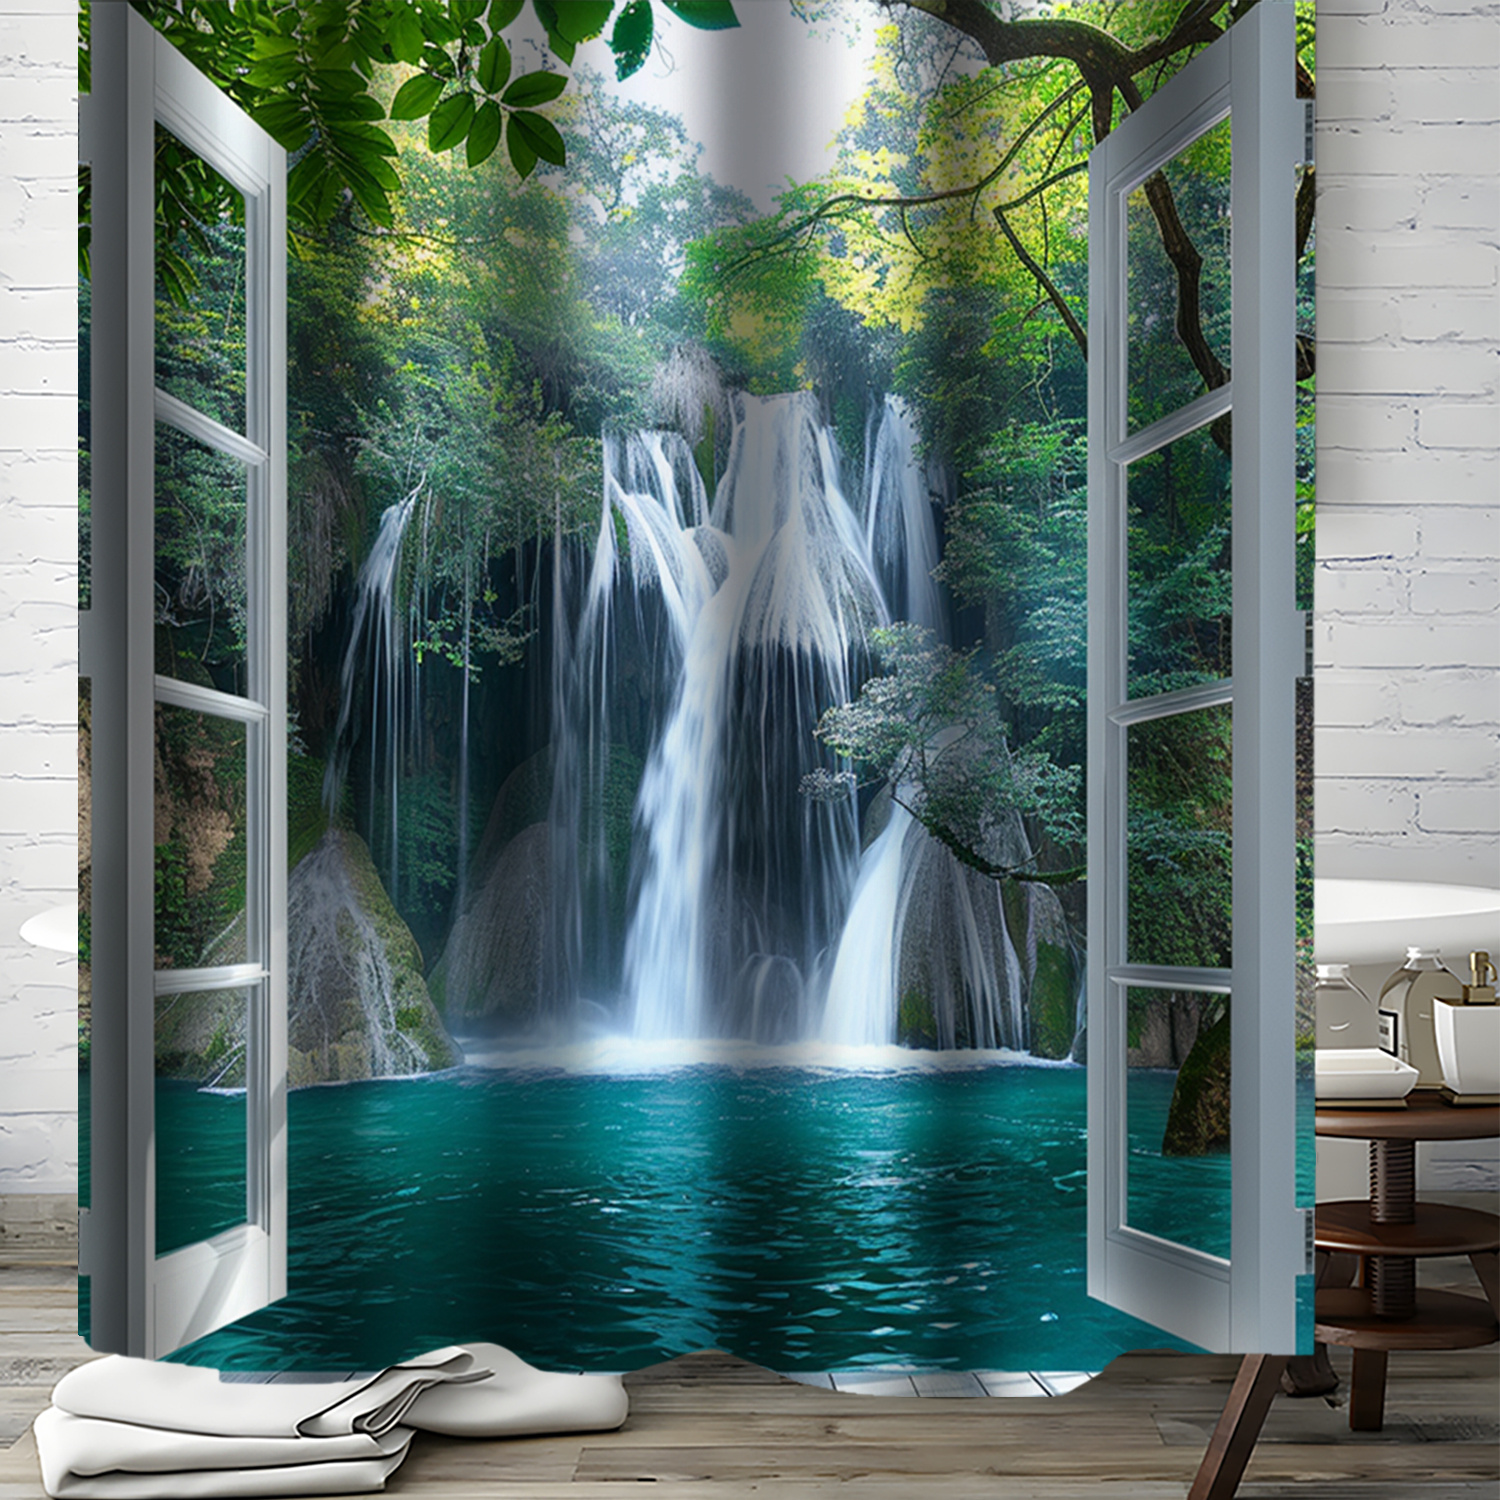 

Luxury 3d Forest Waterfall Window Background Print Shower Curtain With 12 Hooks - 71"x71" - Perfect For Bathroom And Window Decorations